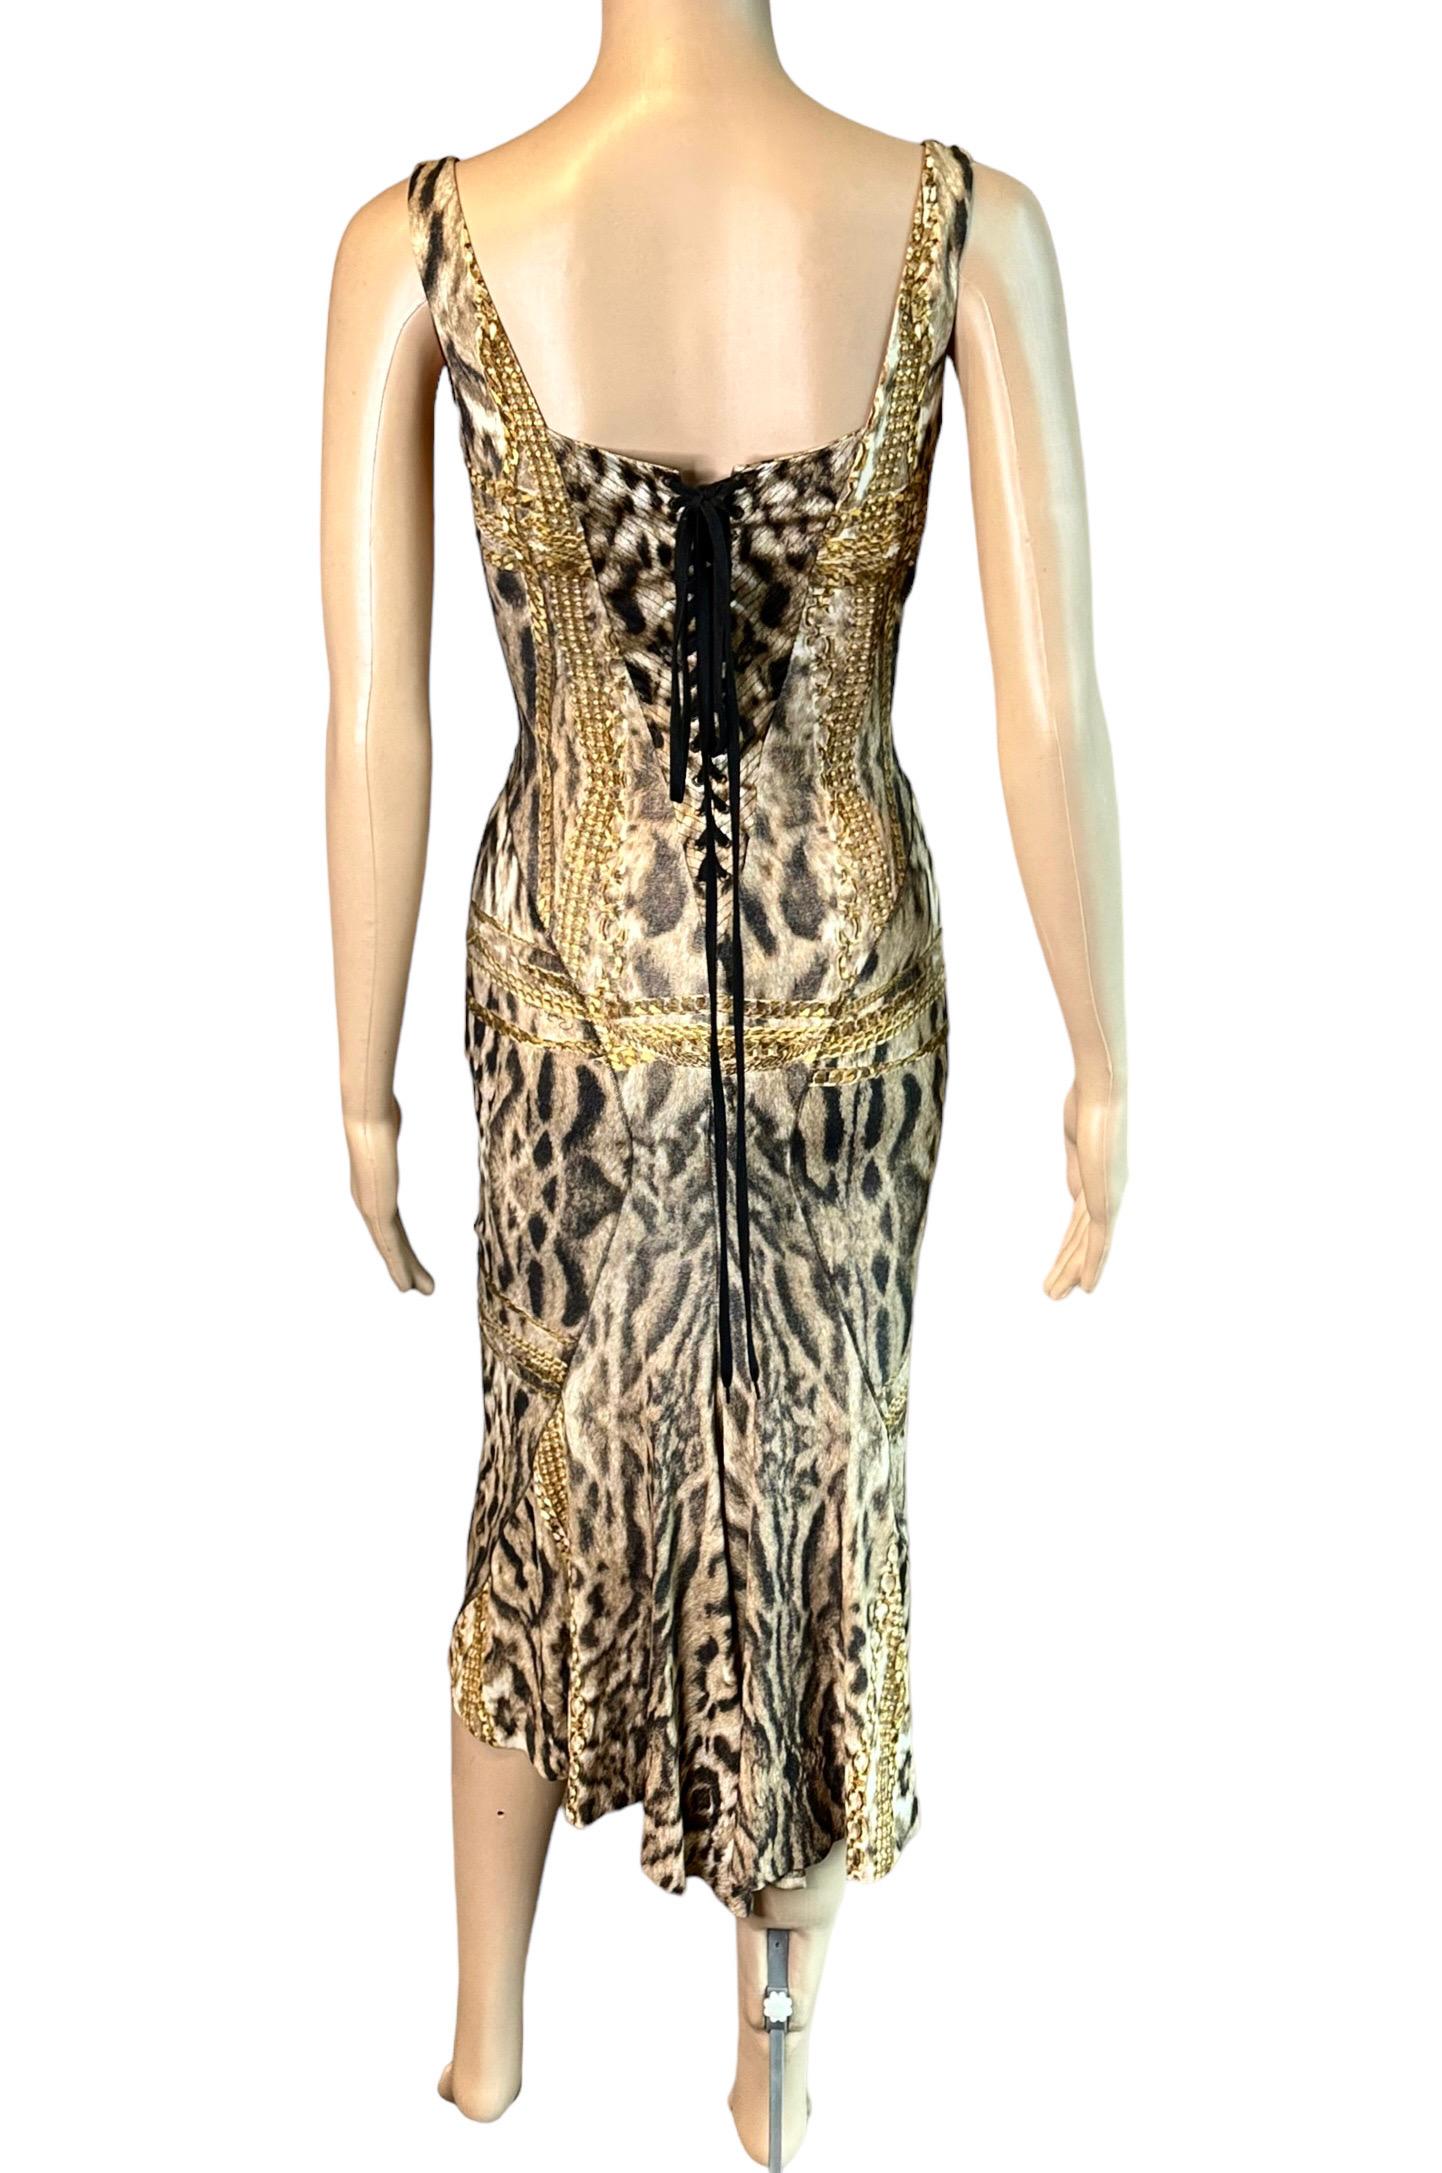 Roberto Cavalli F/W 2003 Bustier Corset Lace Up Animal Chain Print Silk Dress In Good Condition For Sale In Naples, FL